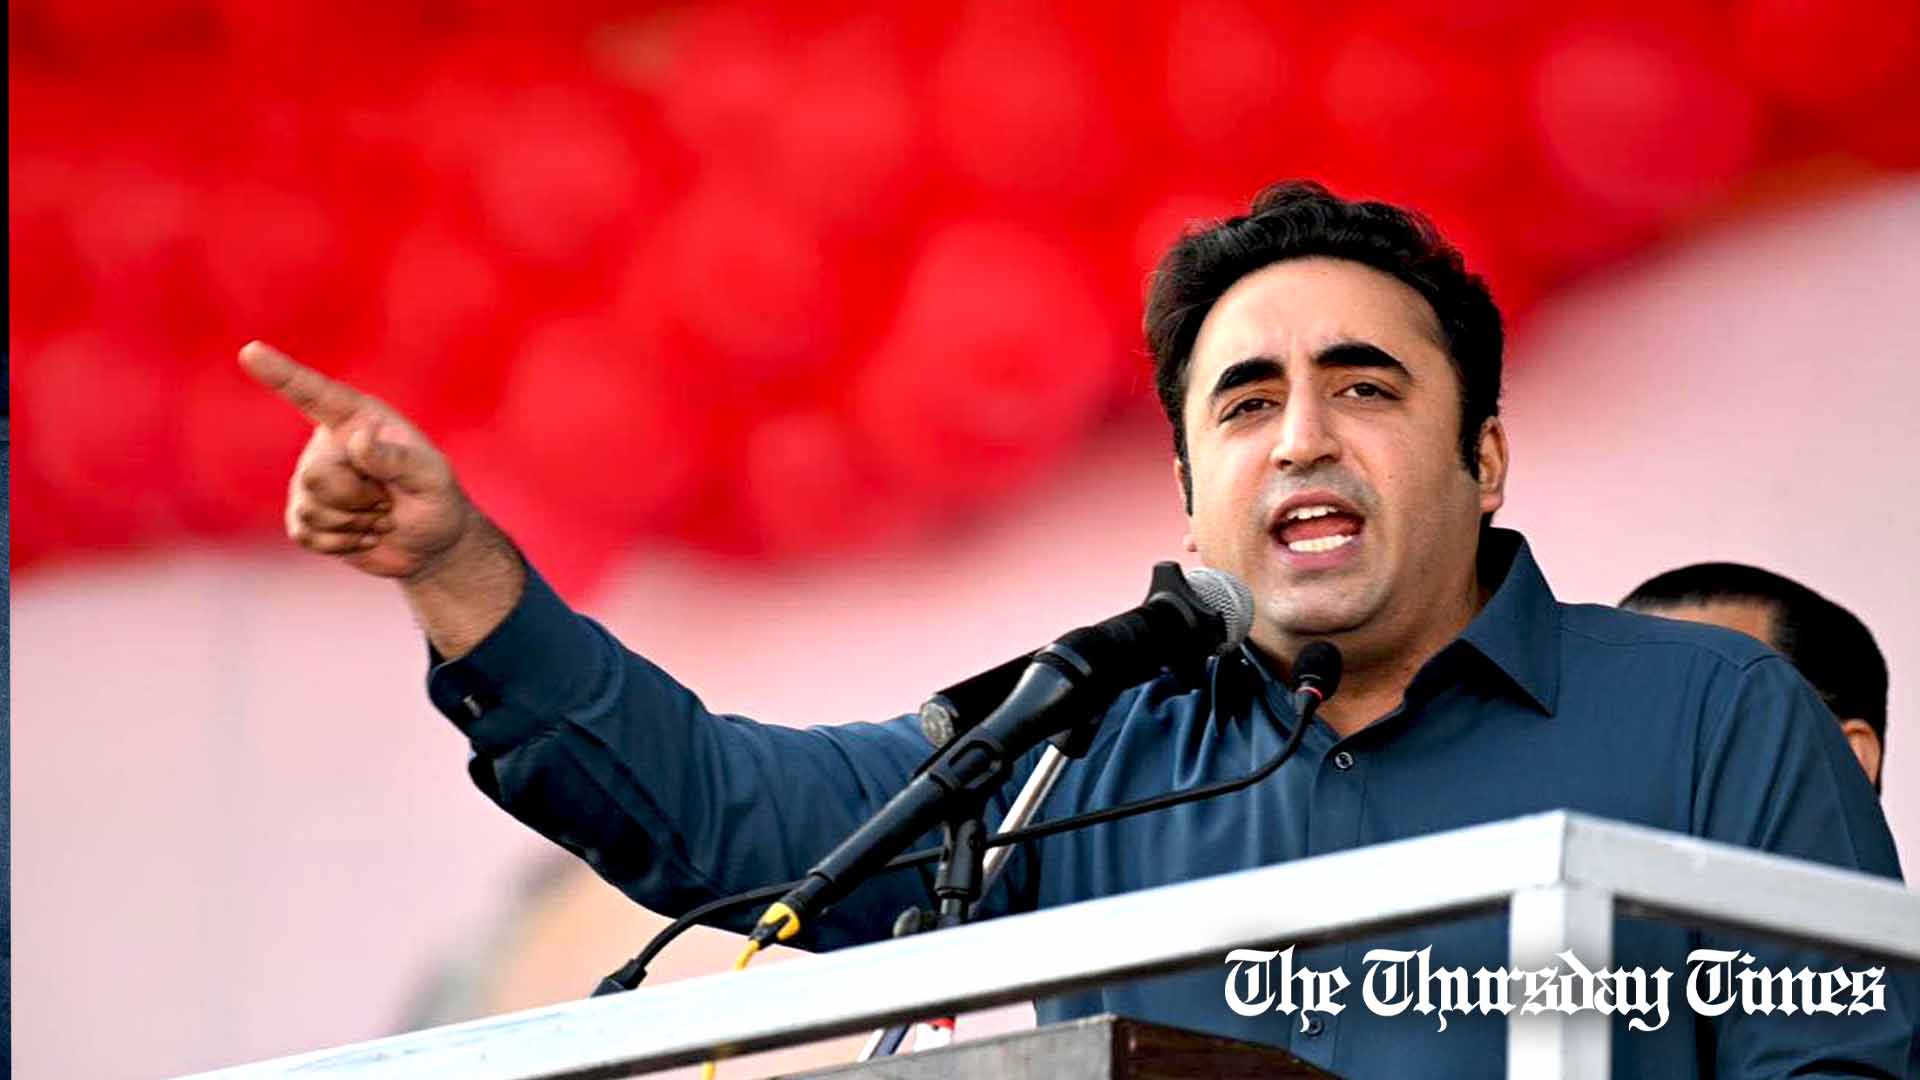 A file photo is shown of PPP chair and former Pakistani foreign minister Bilawal Bhutto-Zardari at Quetta on November 30, 2013. — FILE/THE THURSDAY TIMES